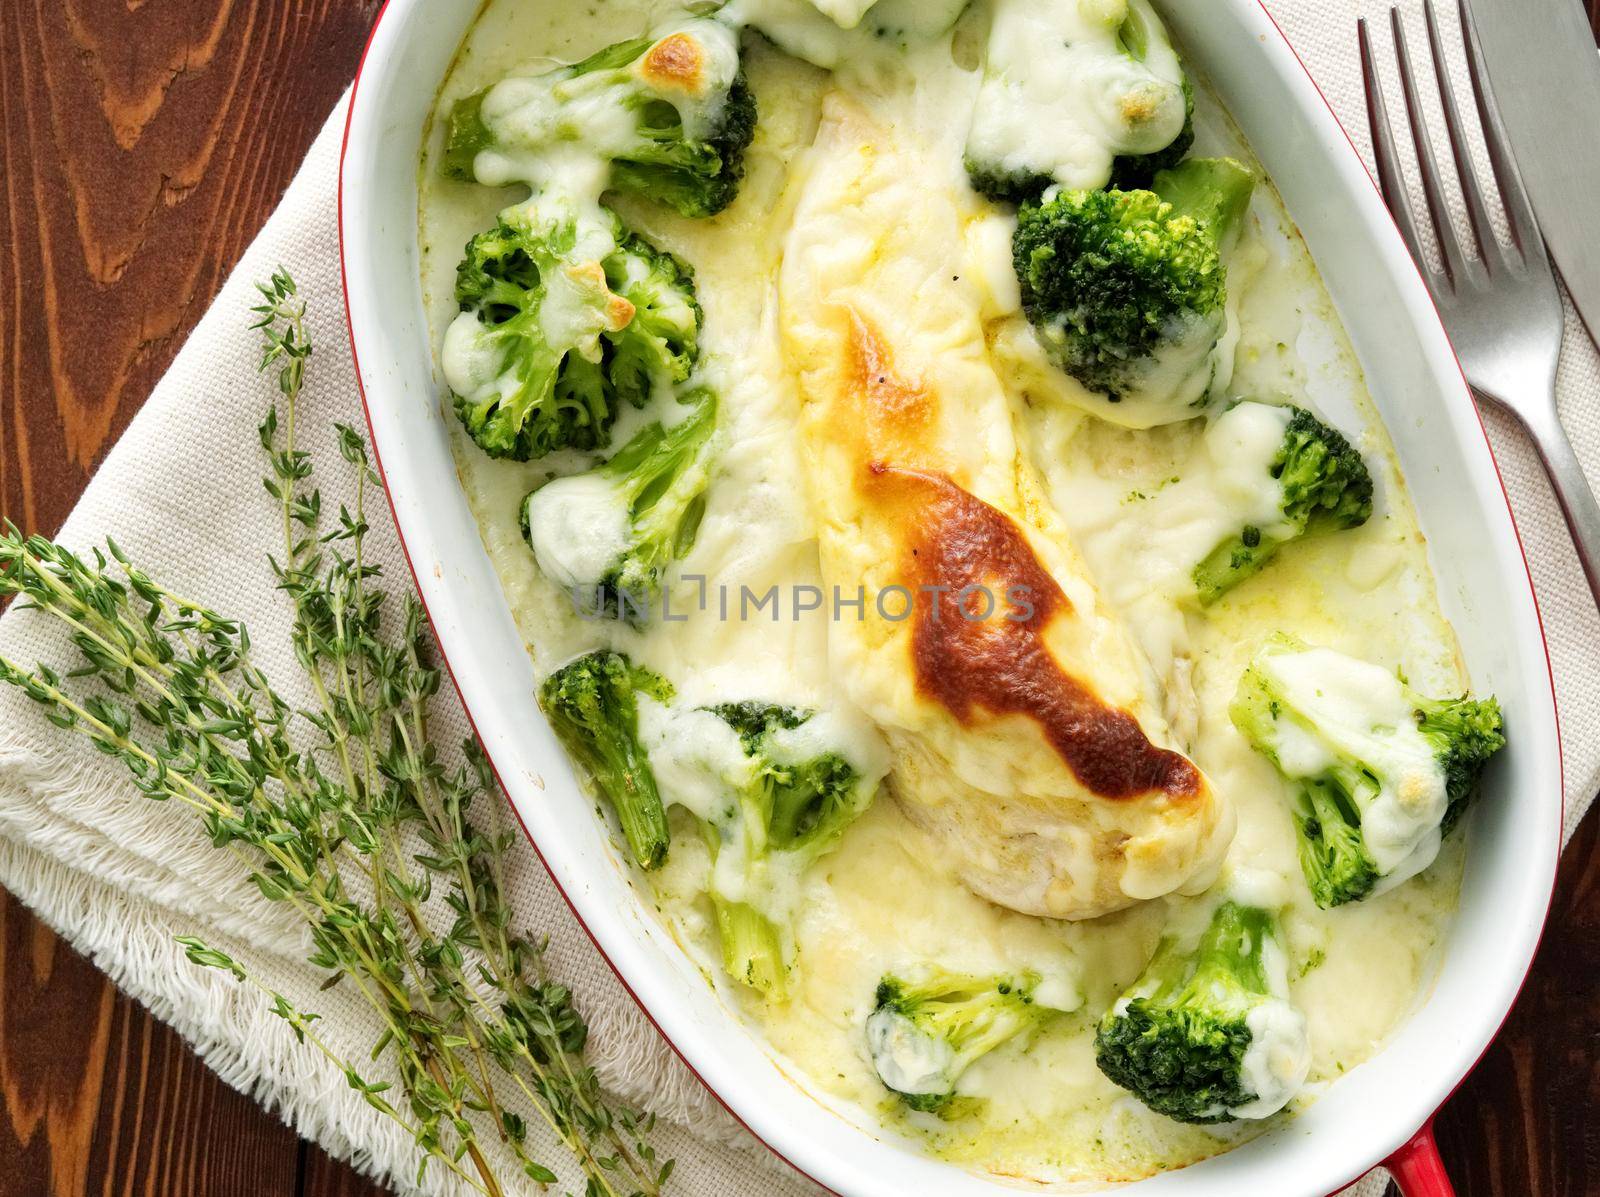 Chicken fillet baked with broccoli in bechamel sauce on dark wooden table. Healthy food by NataBene